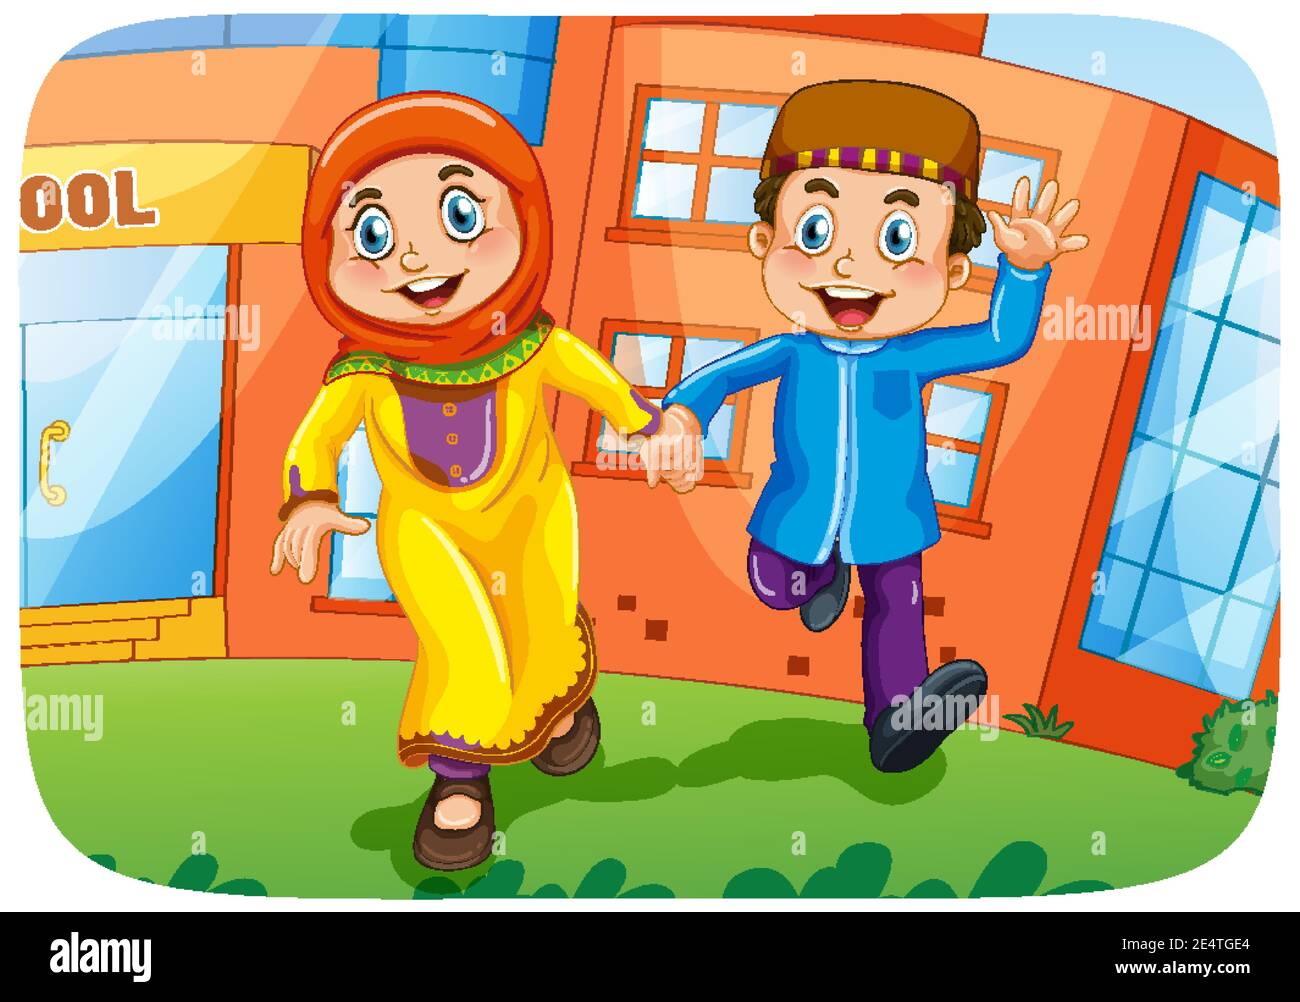 Muslim sister and brother cartoon character illustration Stock Vector